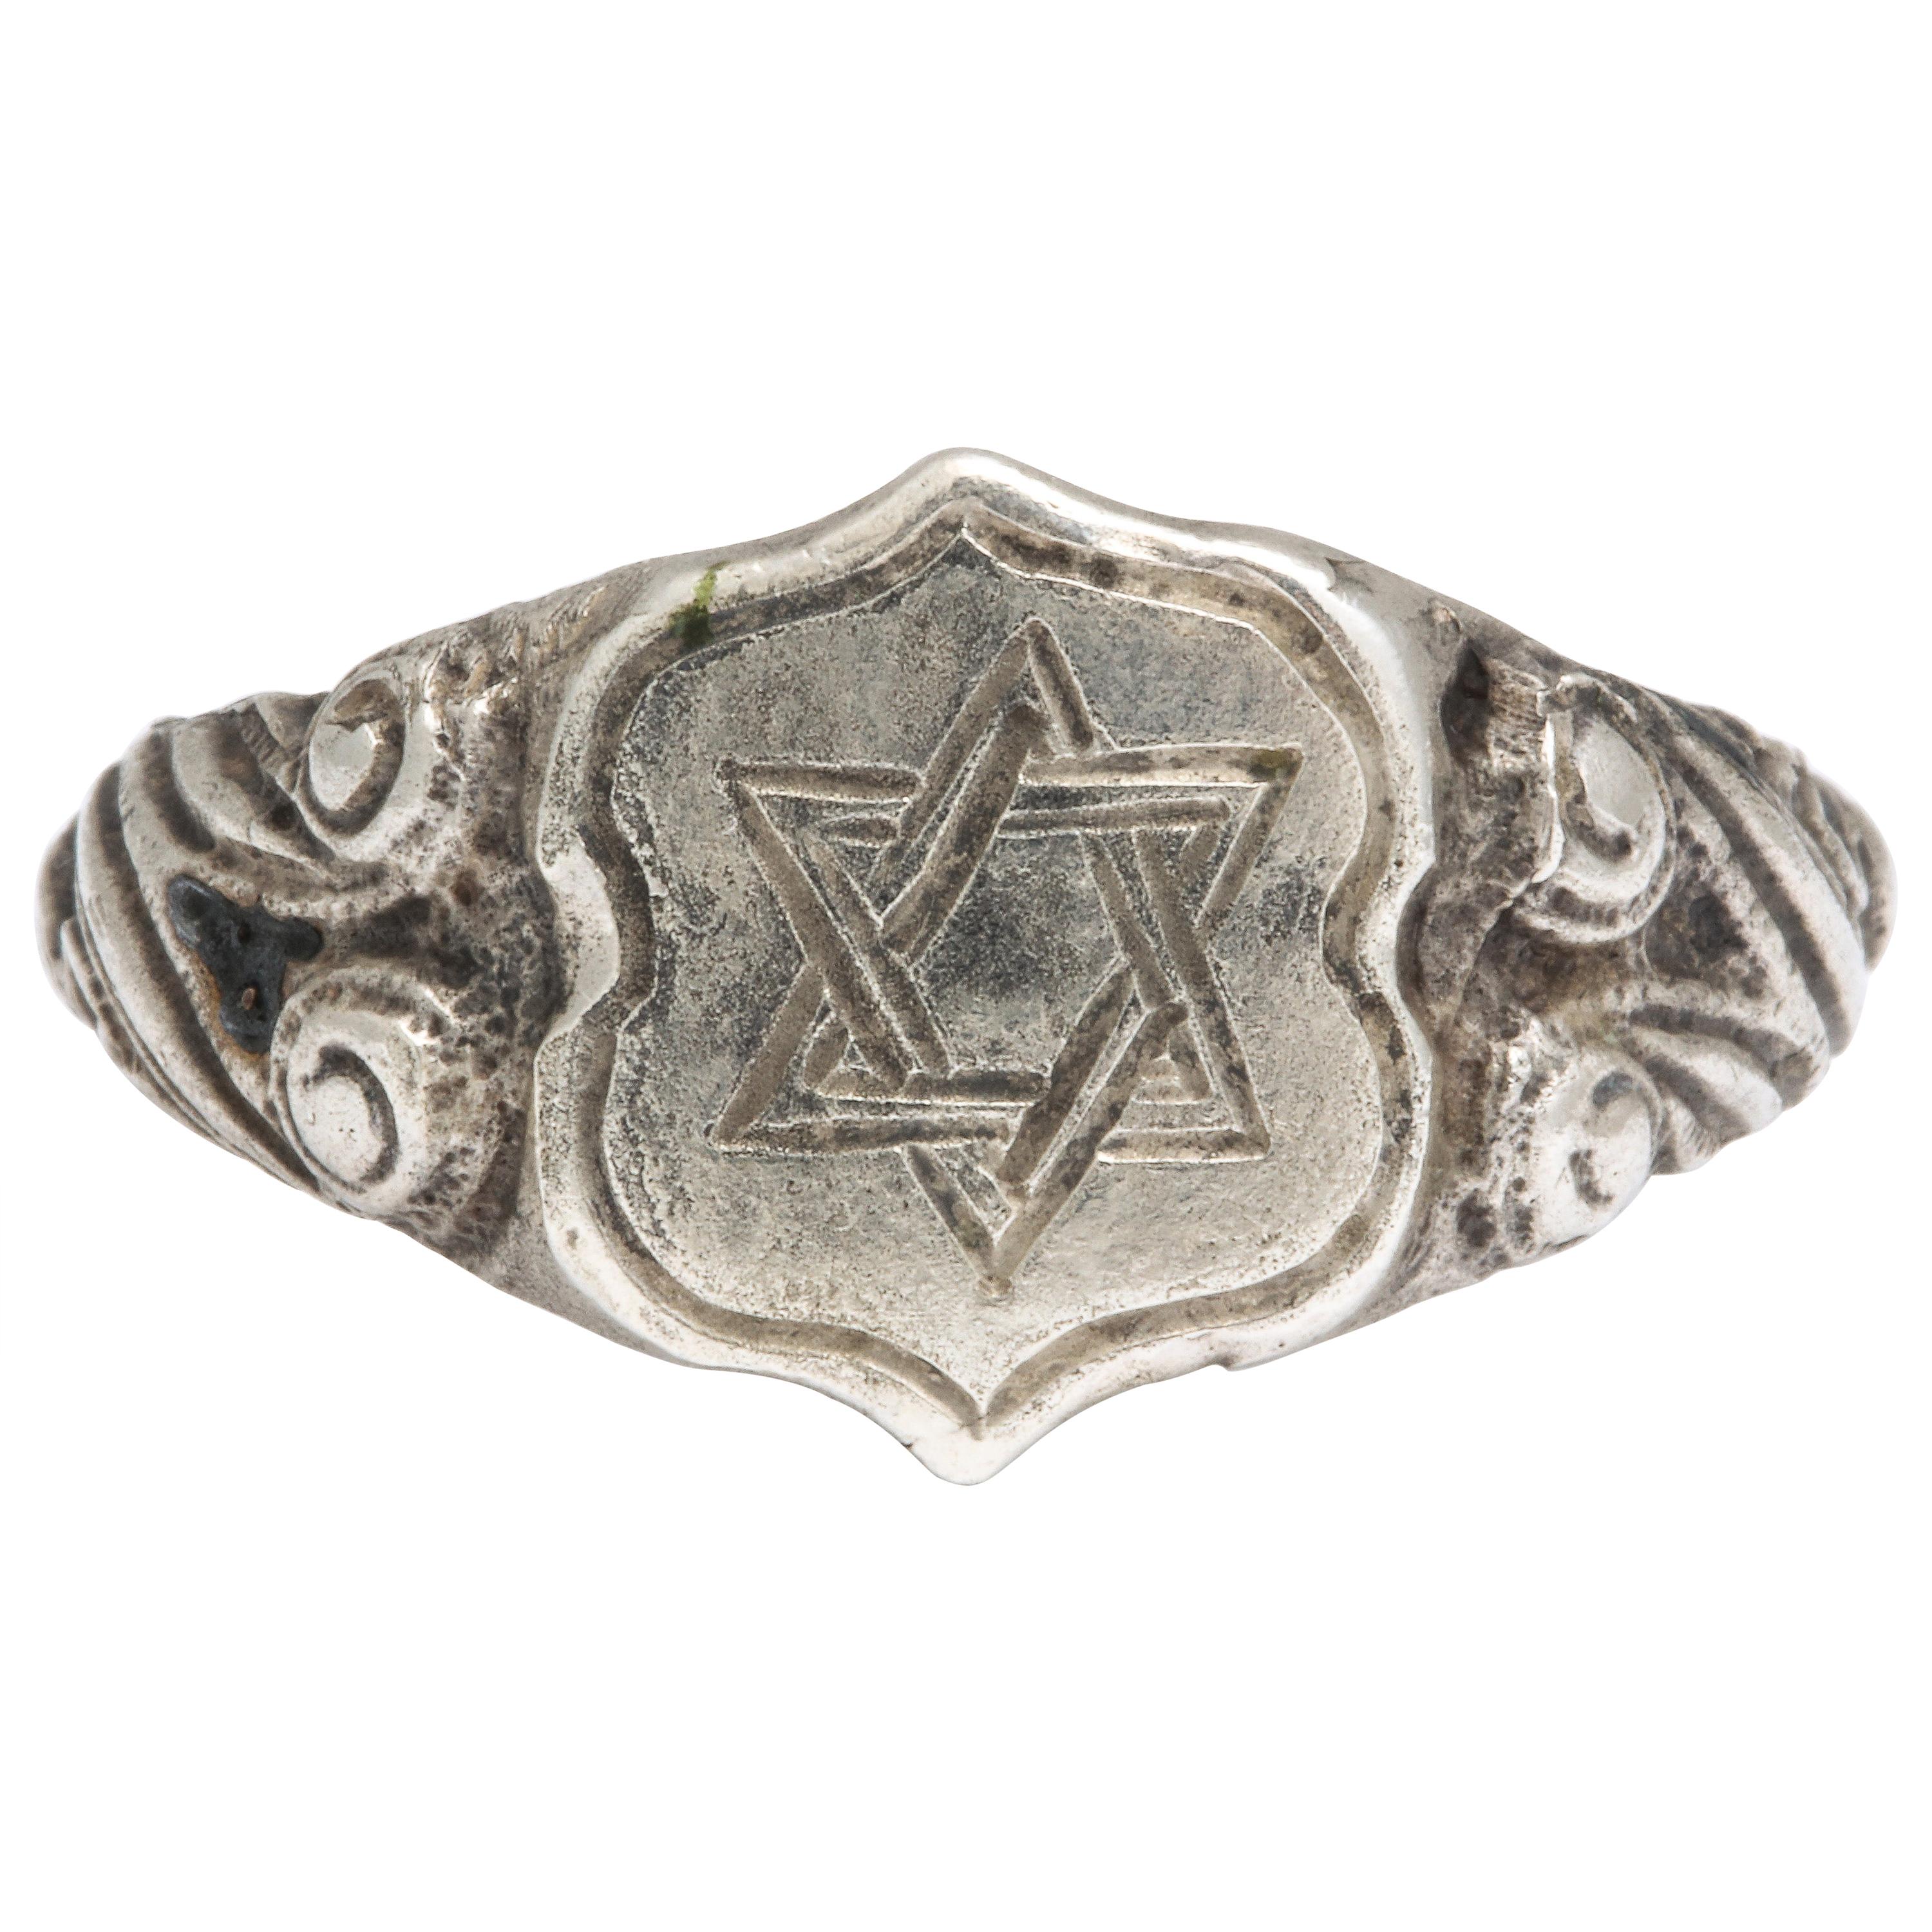 Ancient Medieval Silver Judaica Ring with Star of David